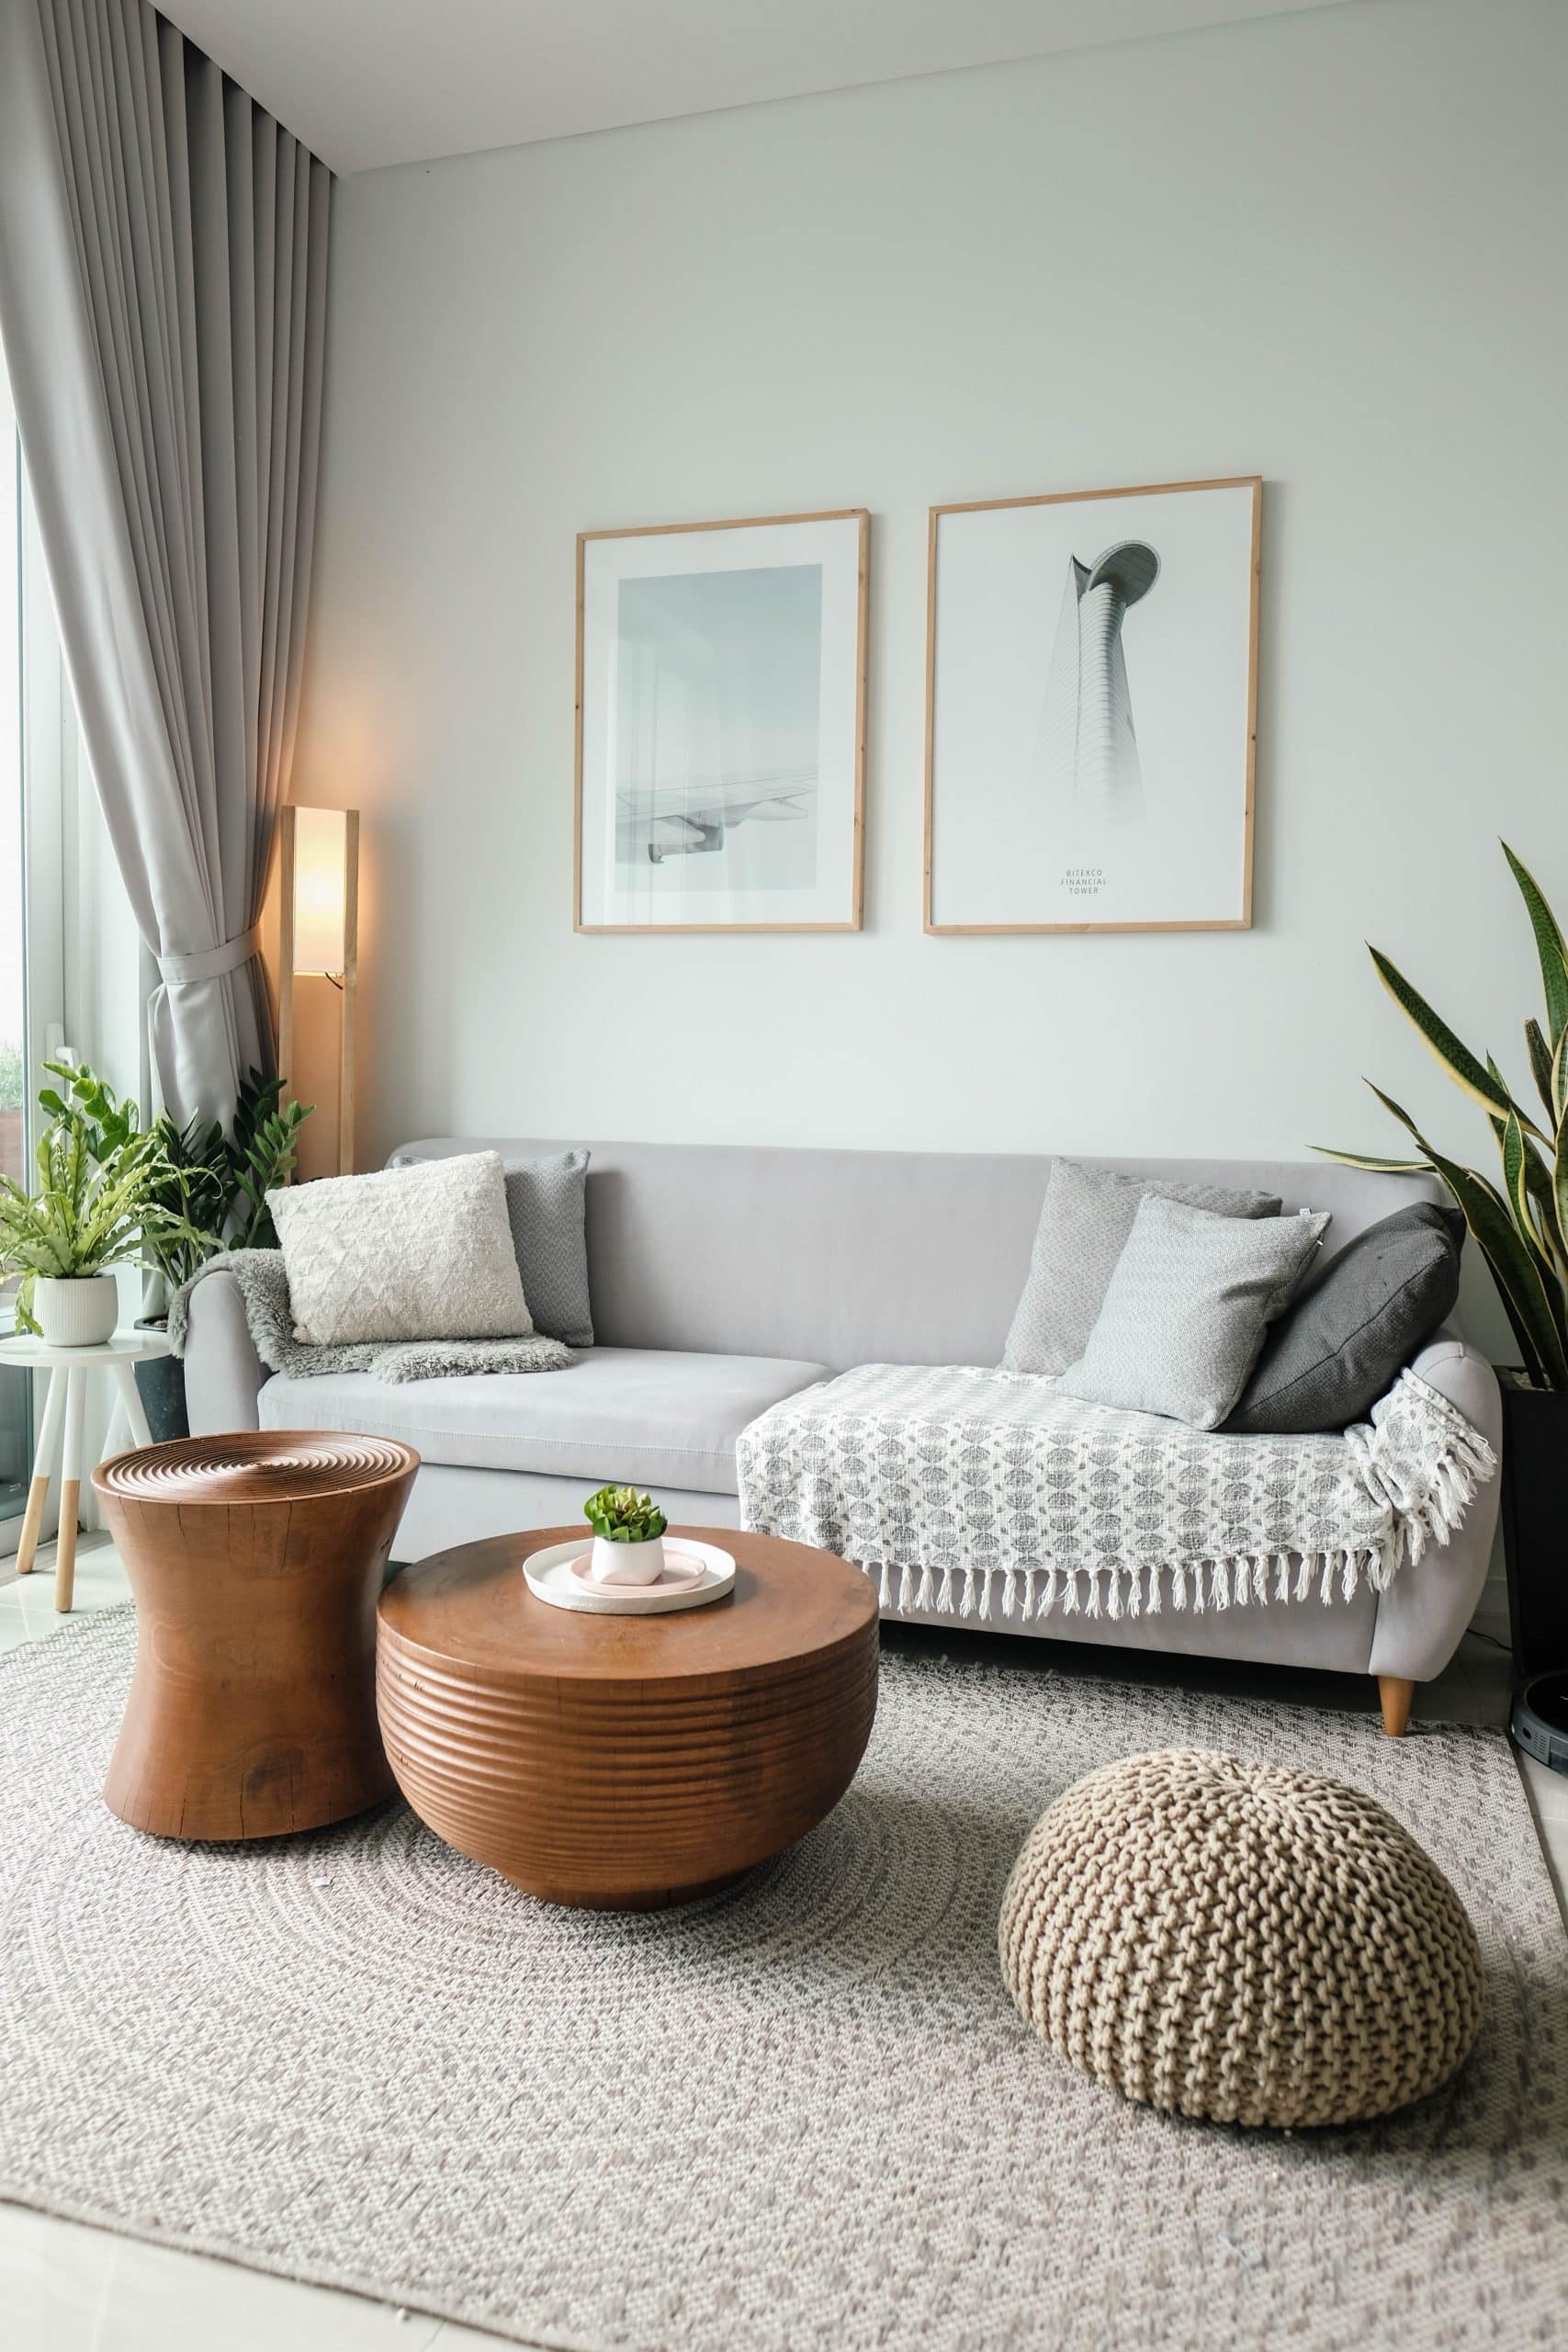 Luxury-Styling a Small Apartment: A Practical Guide